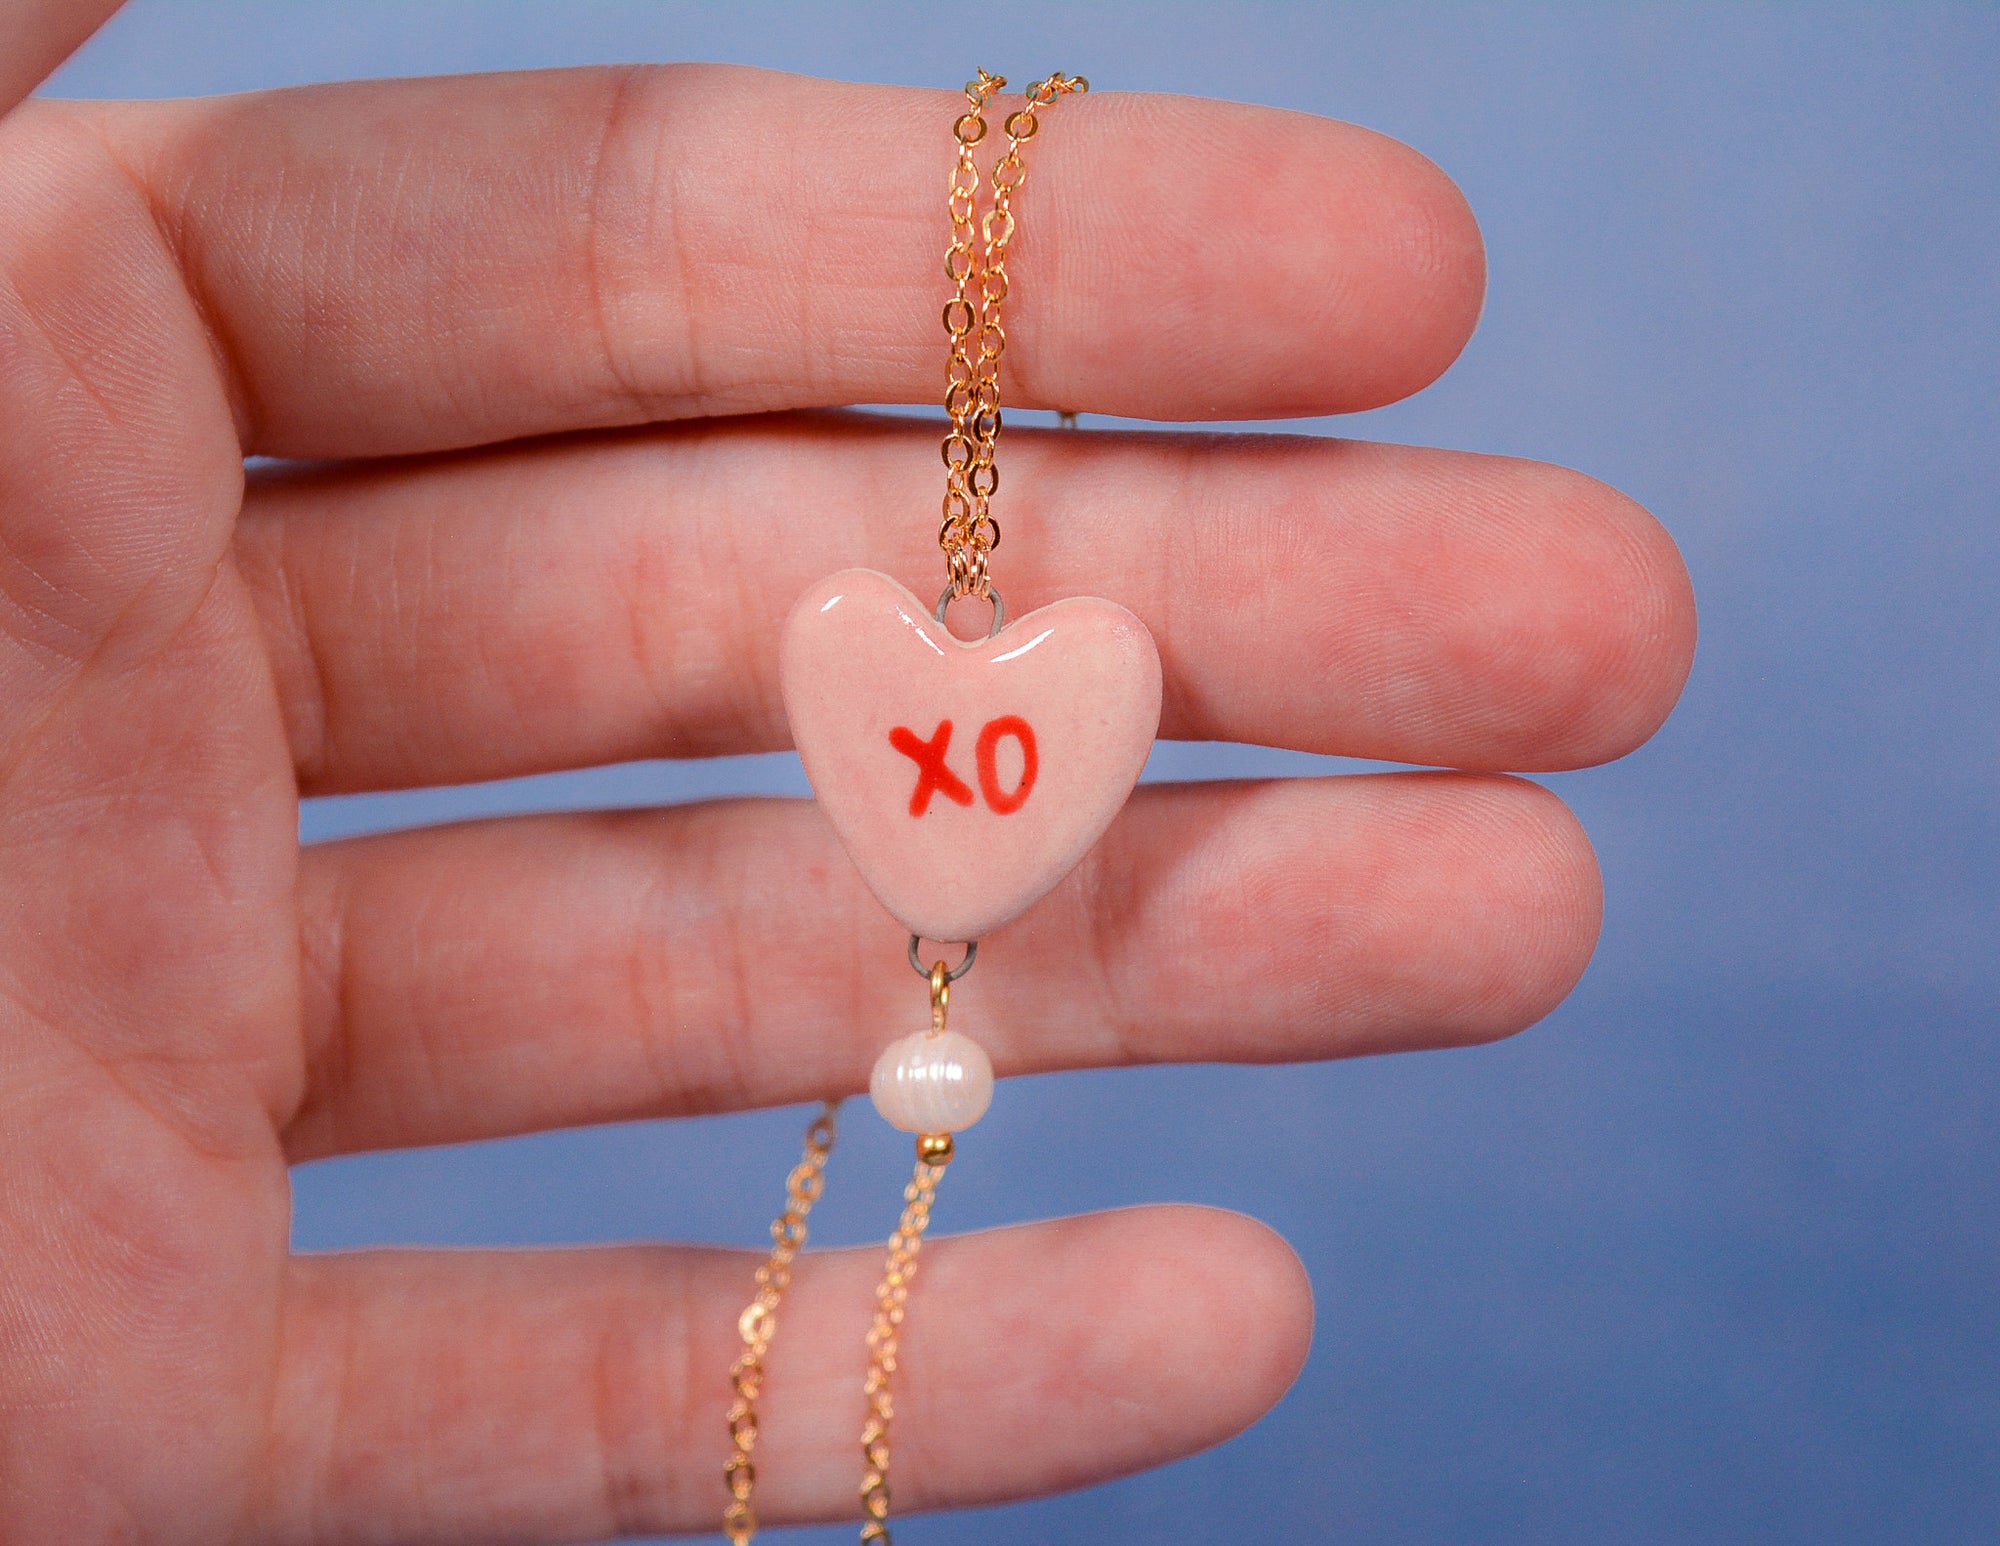 Candy Heart XO Necklace